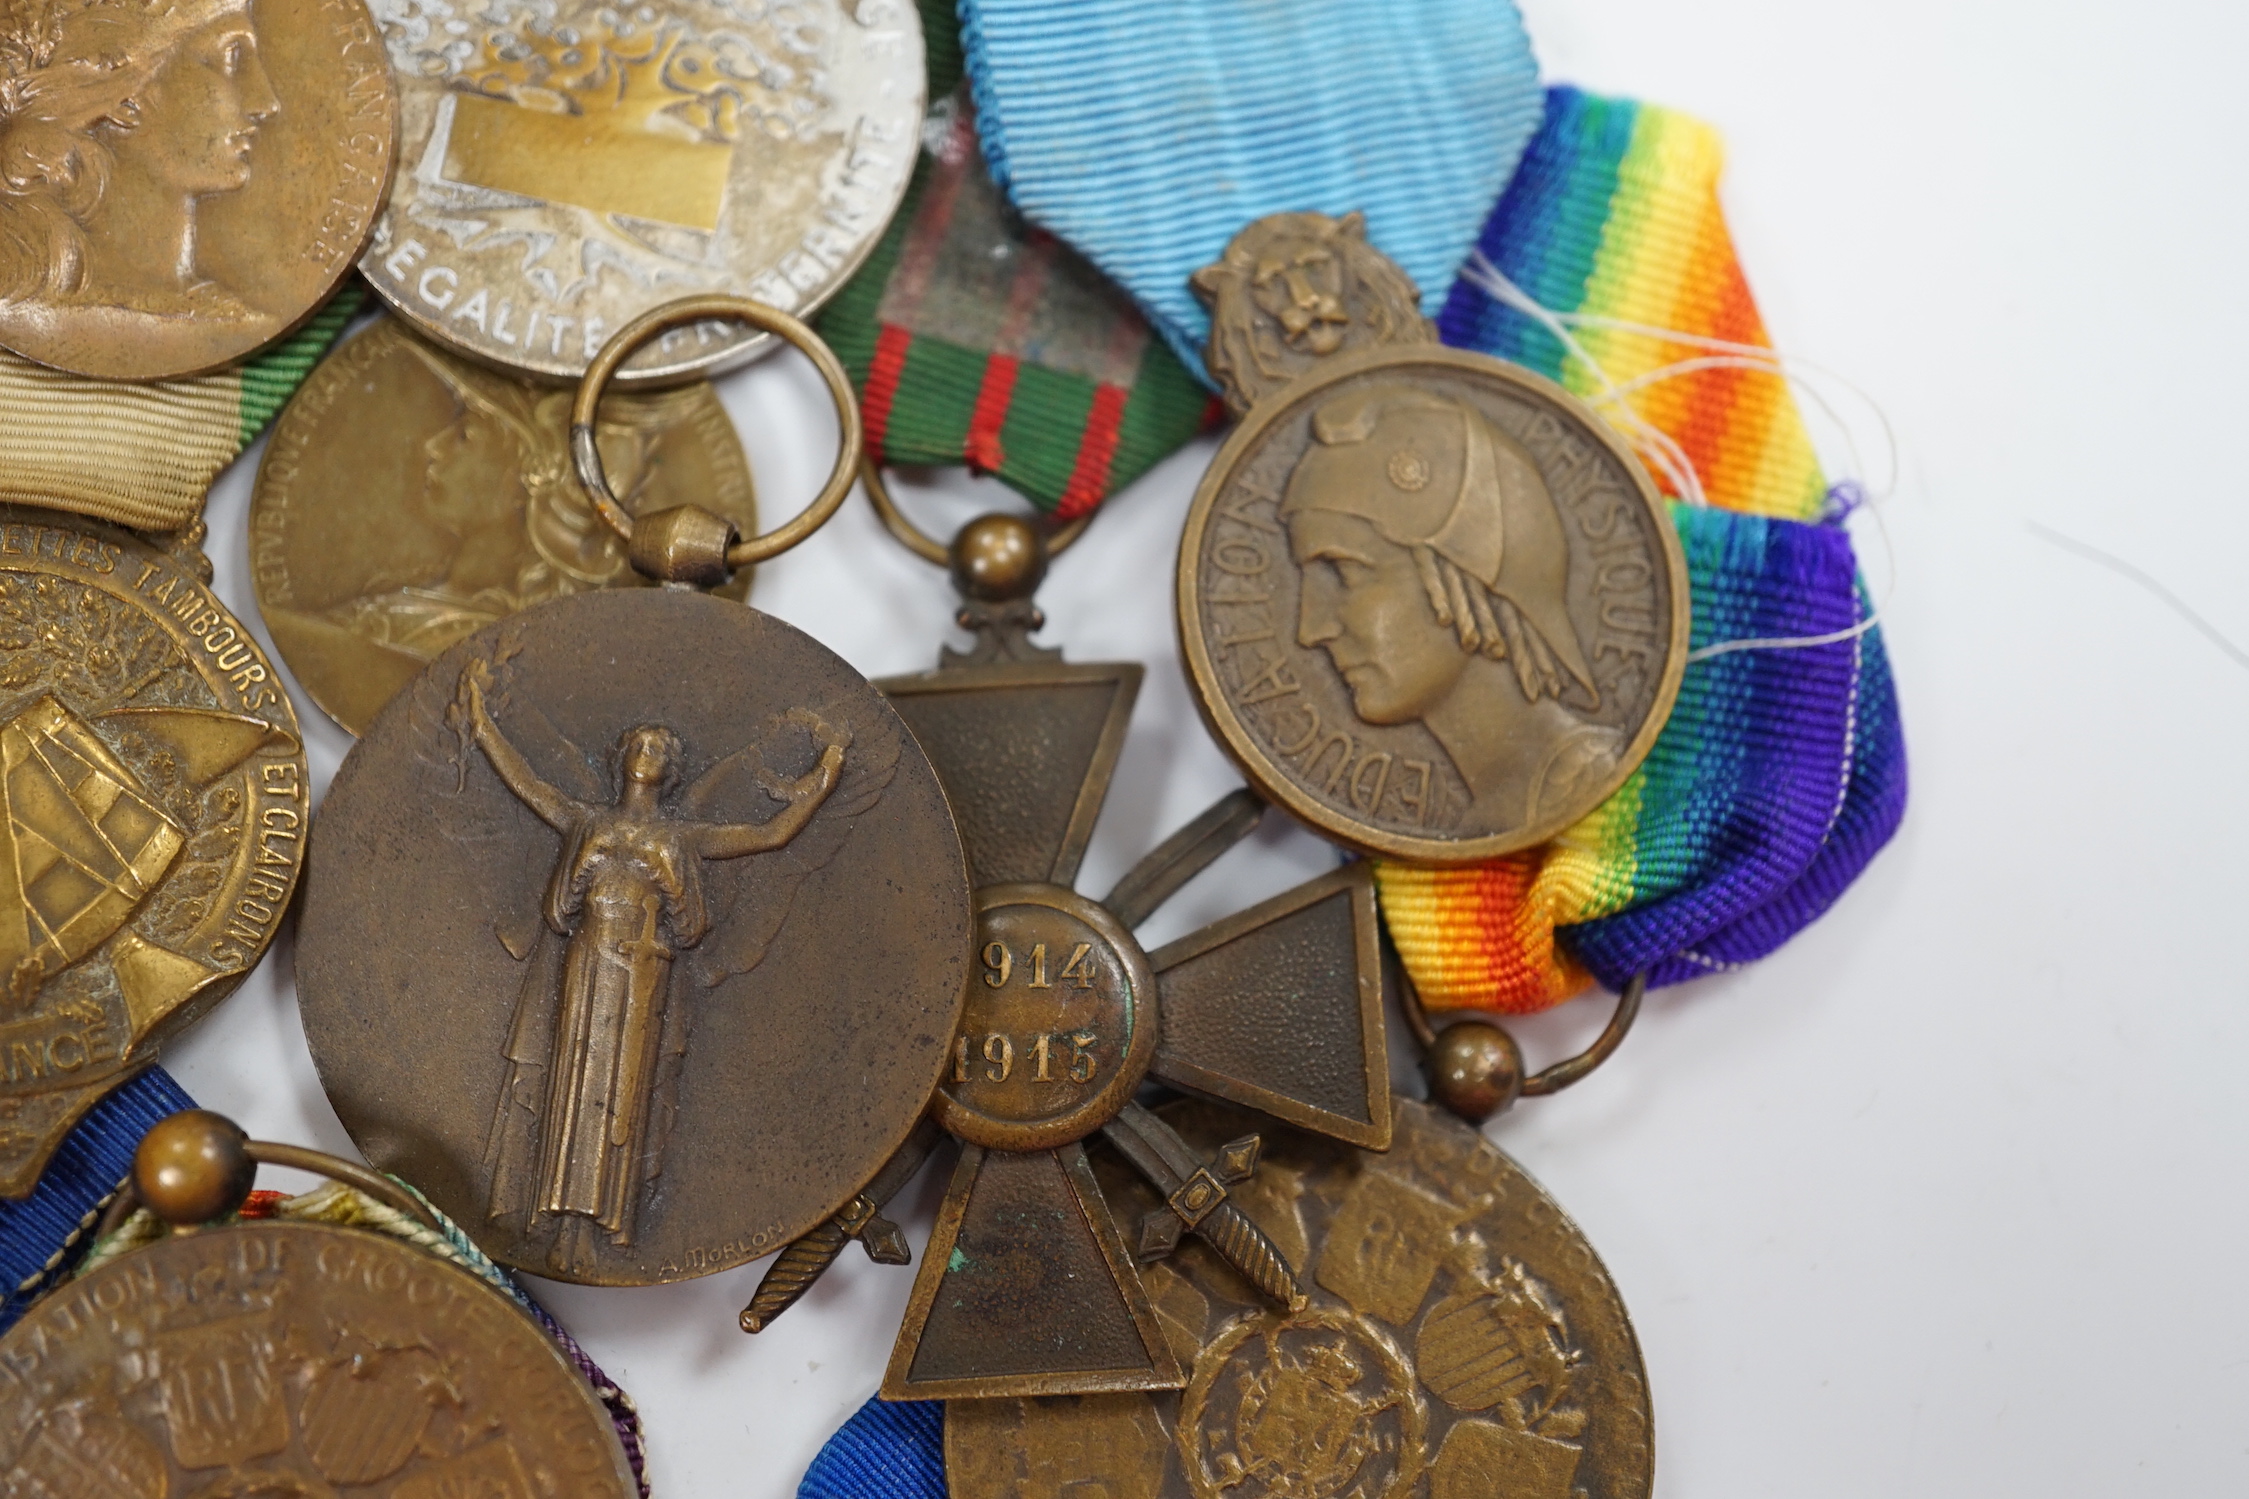 Eighteen French and Belgium medals, etc. including; Medal of Honour, War Cross, Medal of Honour - Image 15 of 17